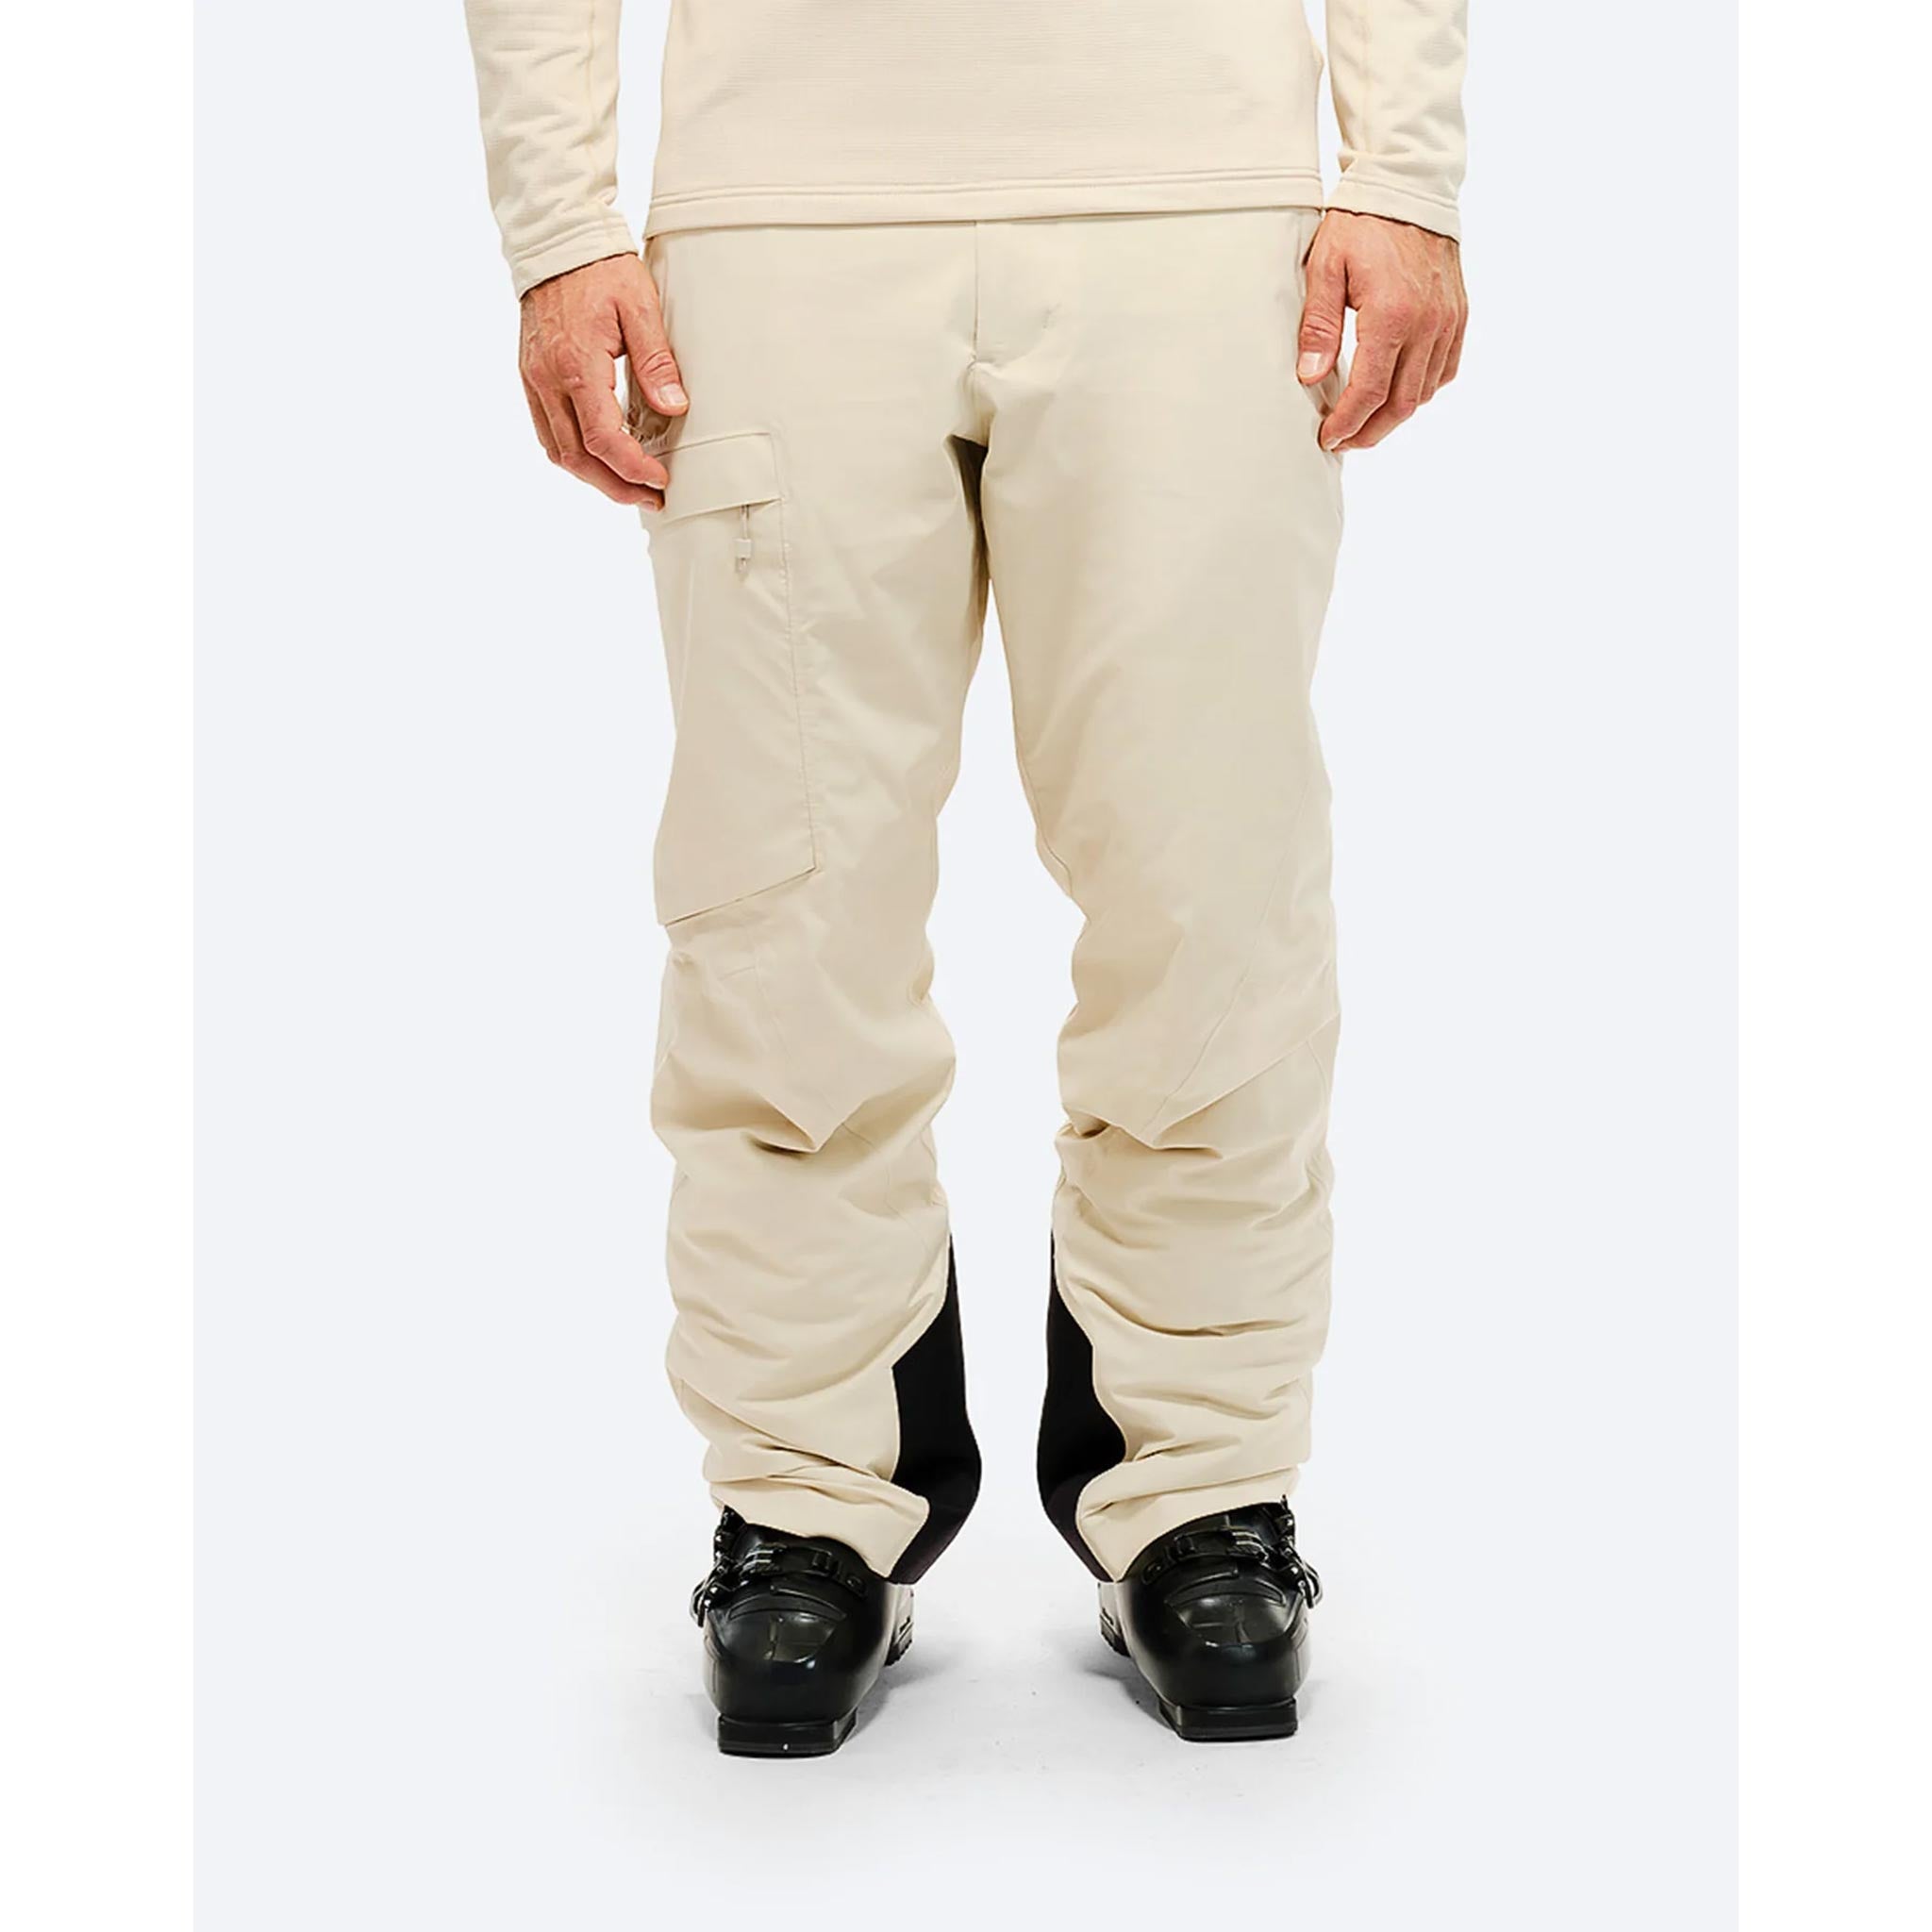 Gore-Tex 2L Stretch Pant in Castle Wall